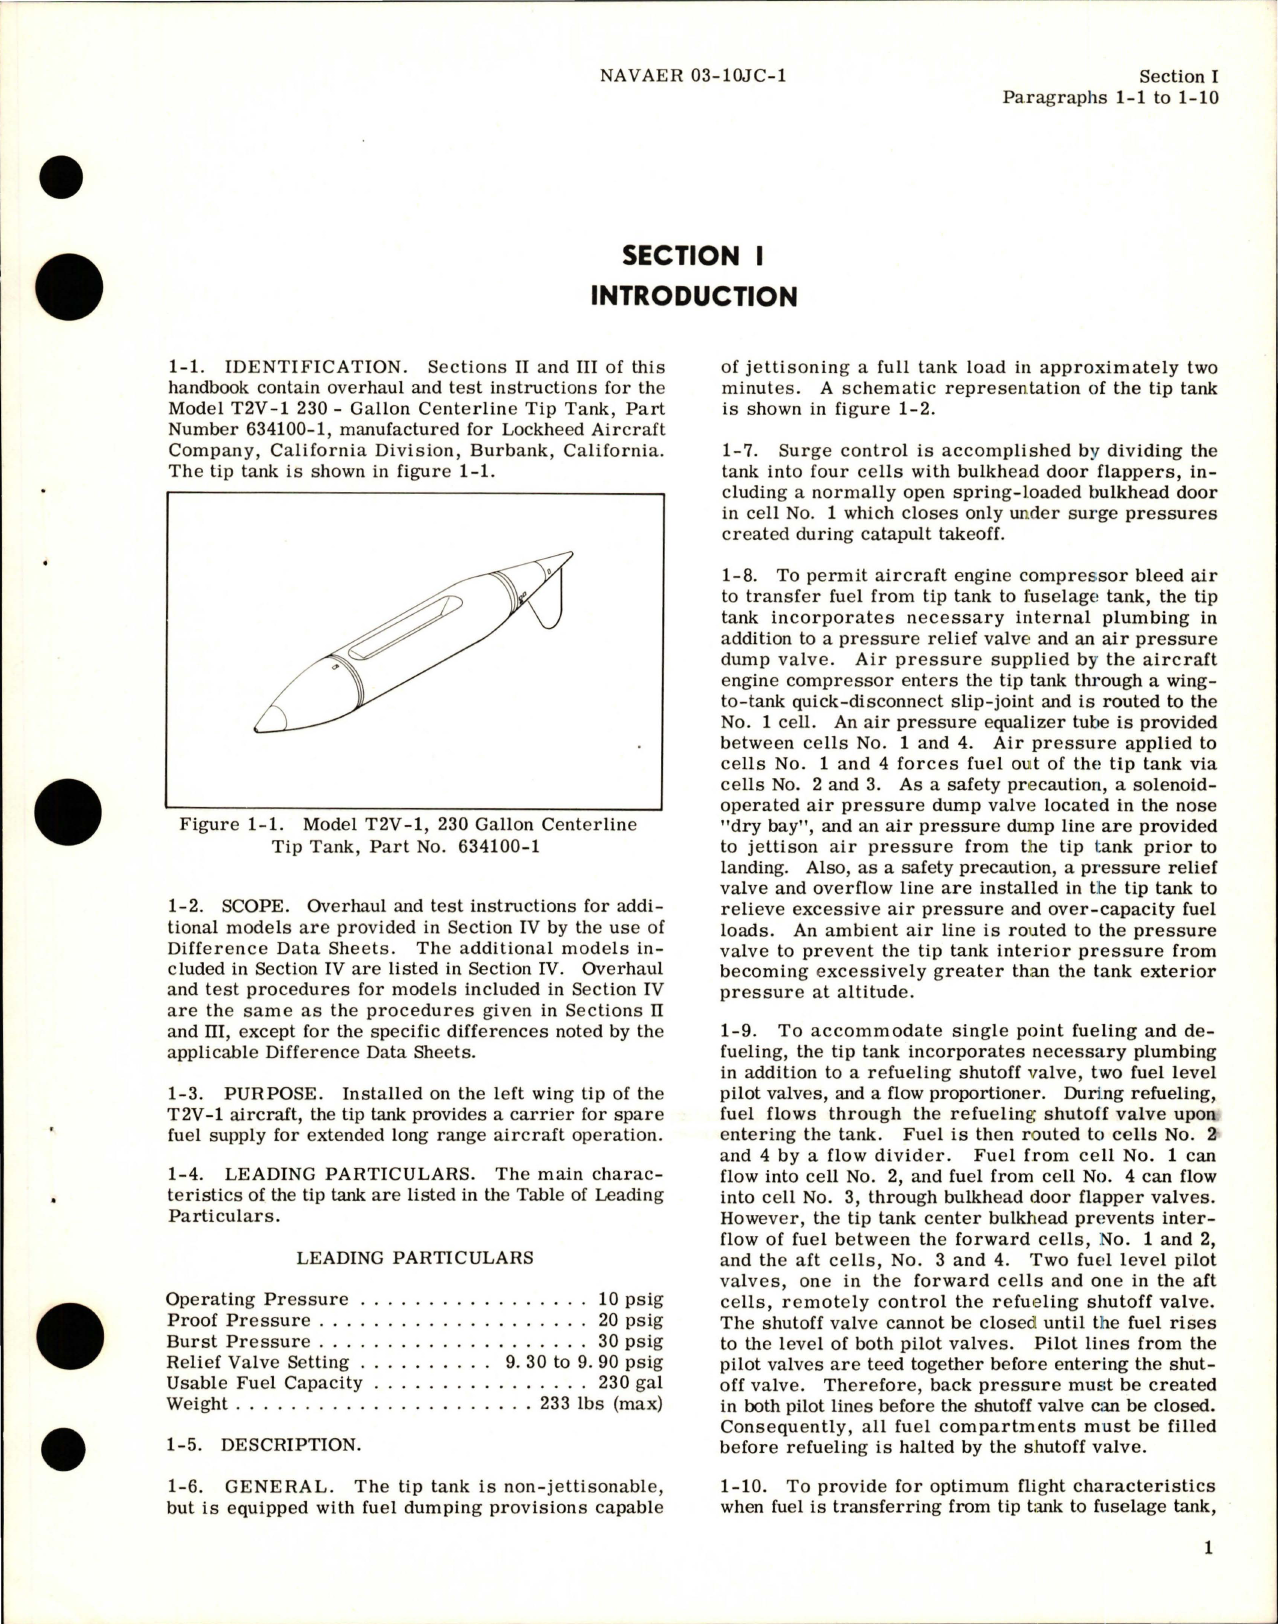 Sample page 5 from AirCorps Library document: Overhaul Instructions for Centerline Tip Tank - Model T2V-1 - 230 Gal - Part 634100-1, 634100-2